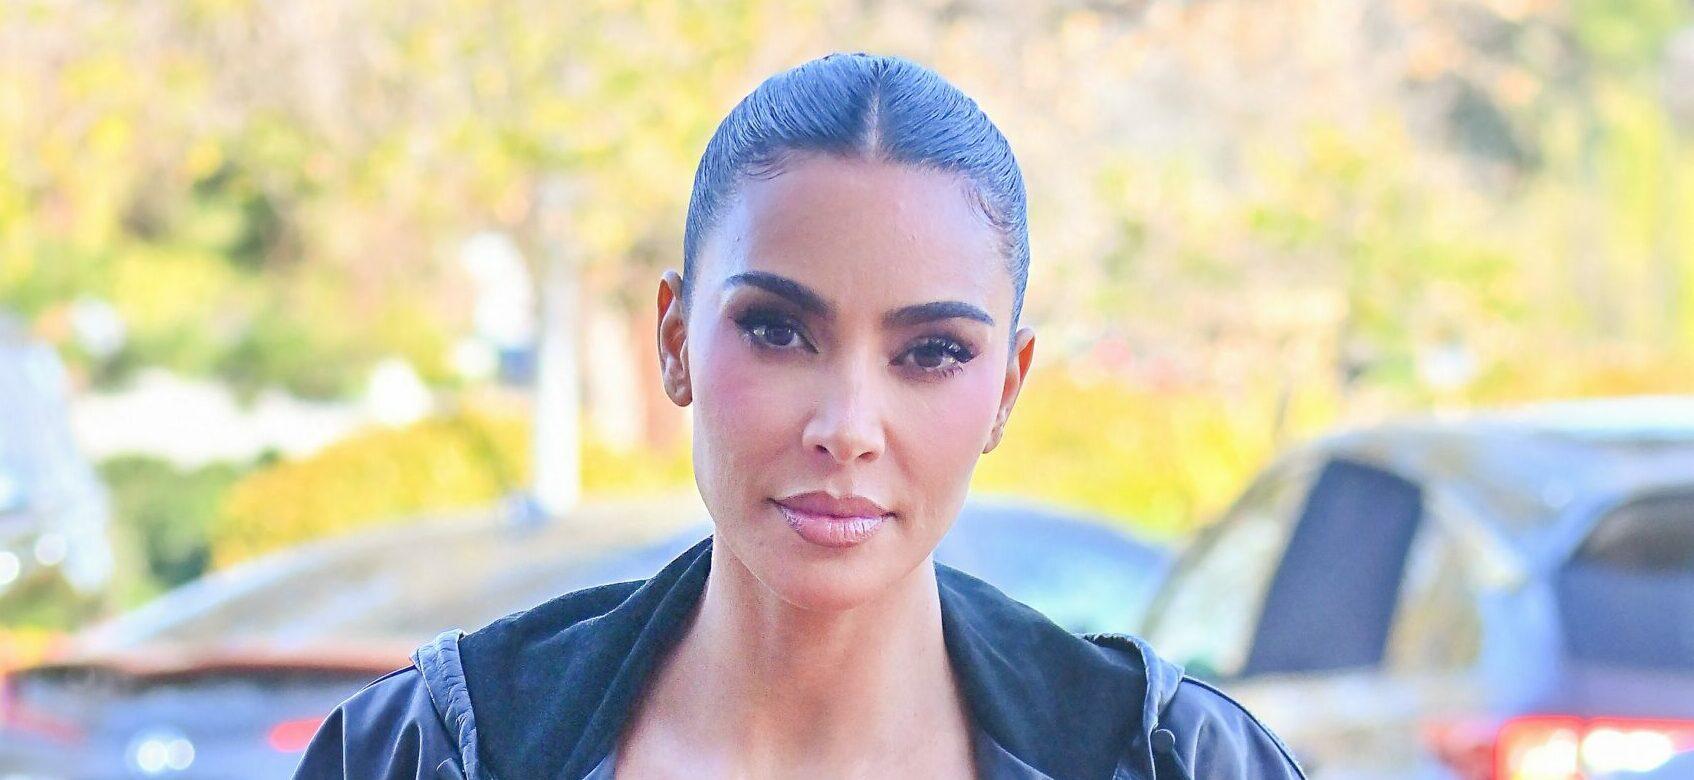 Kim Kardashian wears a long black leather jacket as she makes her way to a basketball game in Thousand Oaks Ca